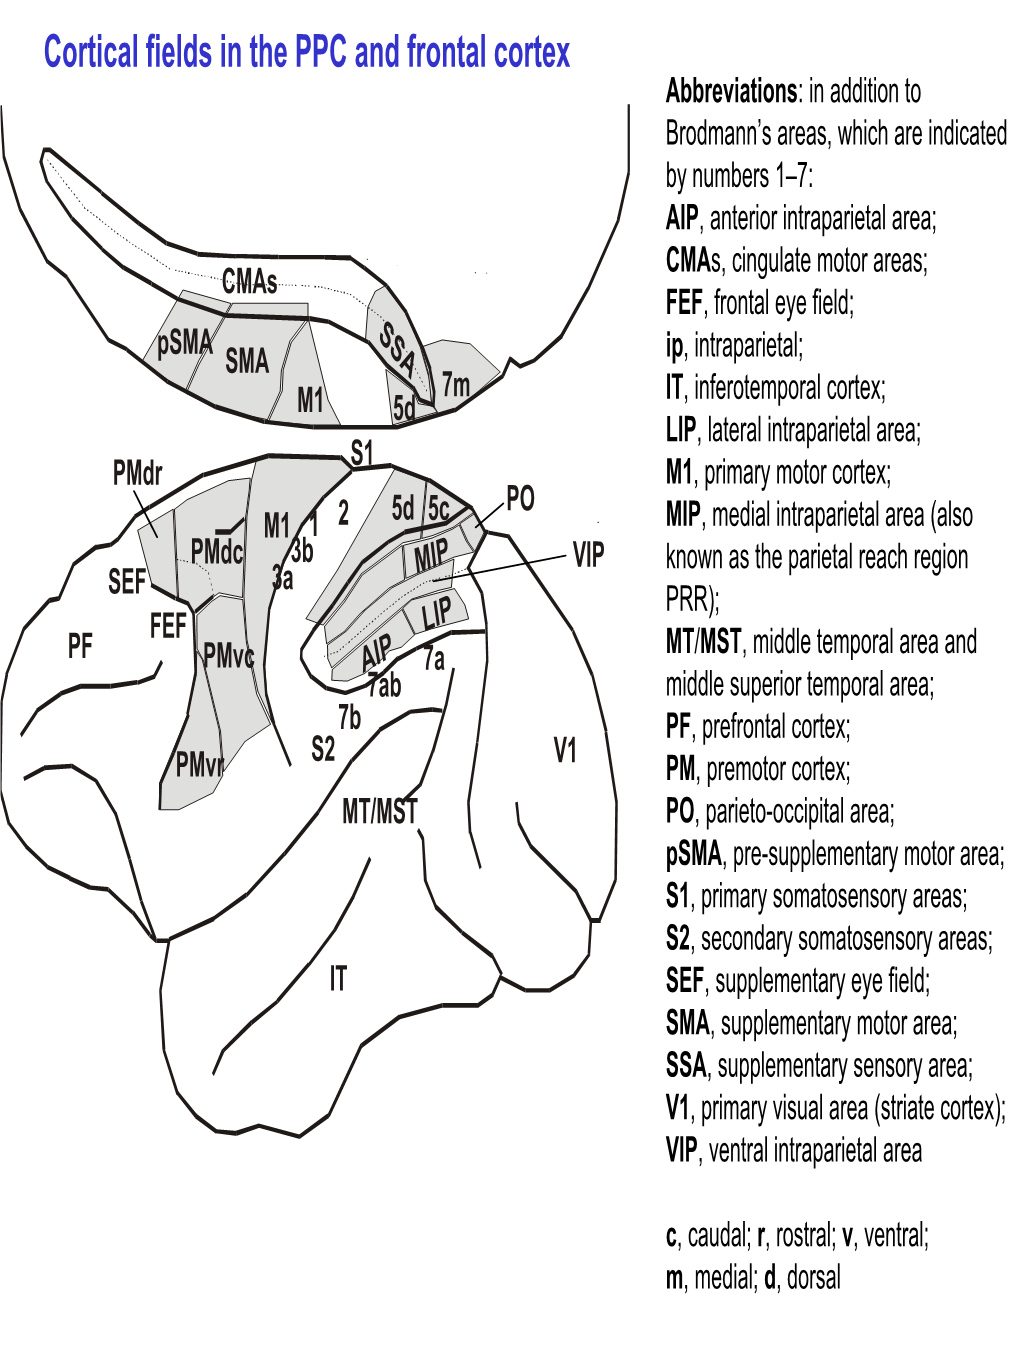 Cortical Fields in the PPC and Frontal Cortex